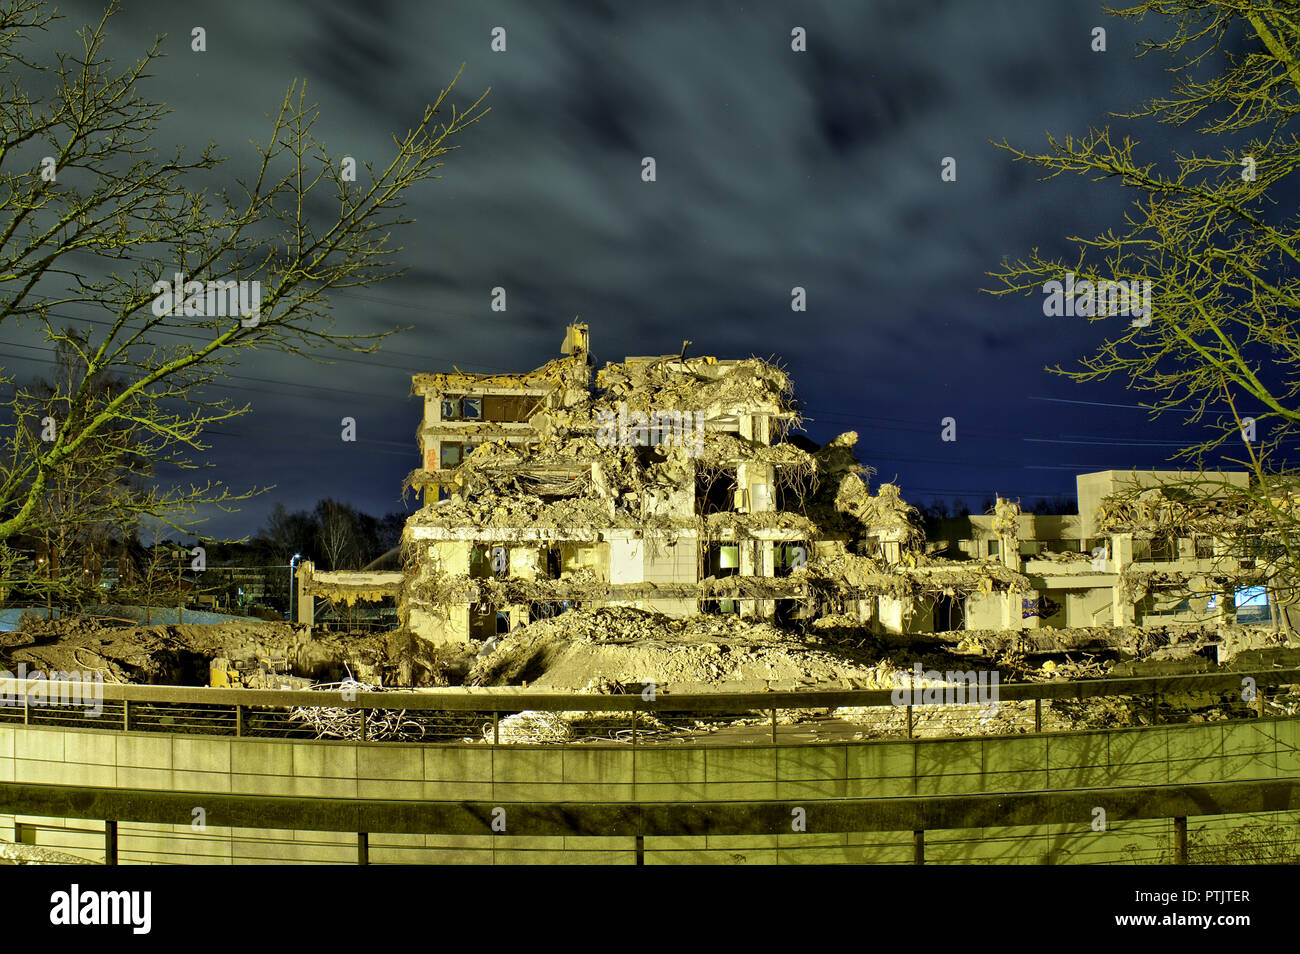 An apocalyptic view of ruins of an office building in the dark with no roof and walls. Interior visible through collapsed walls. Stock Photo